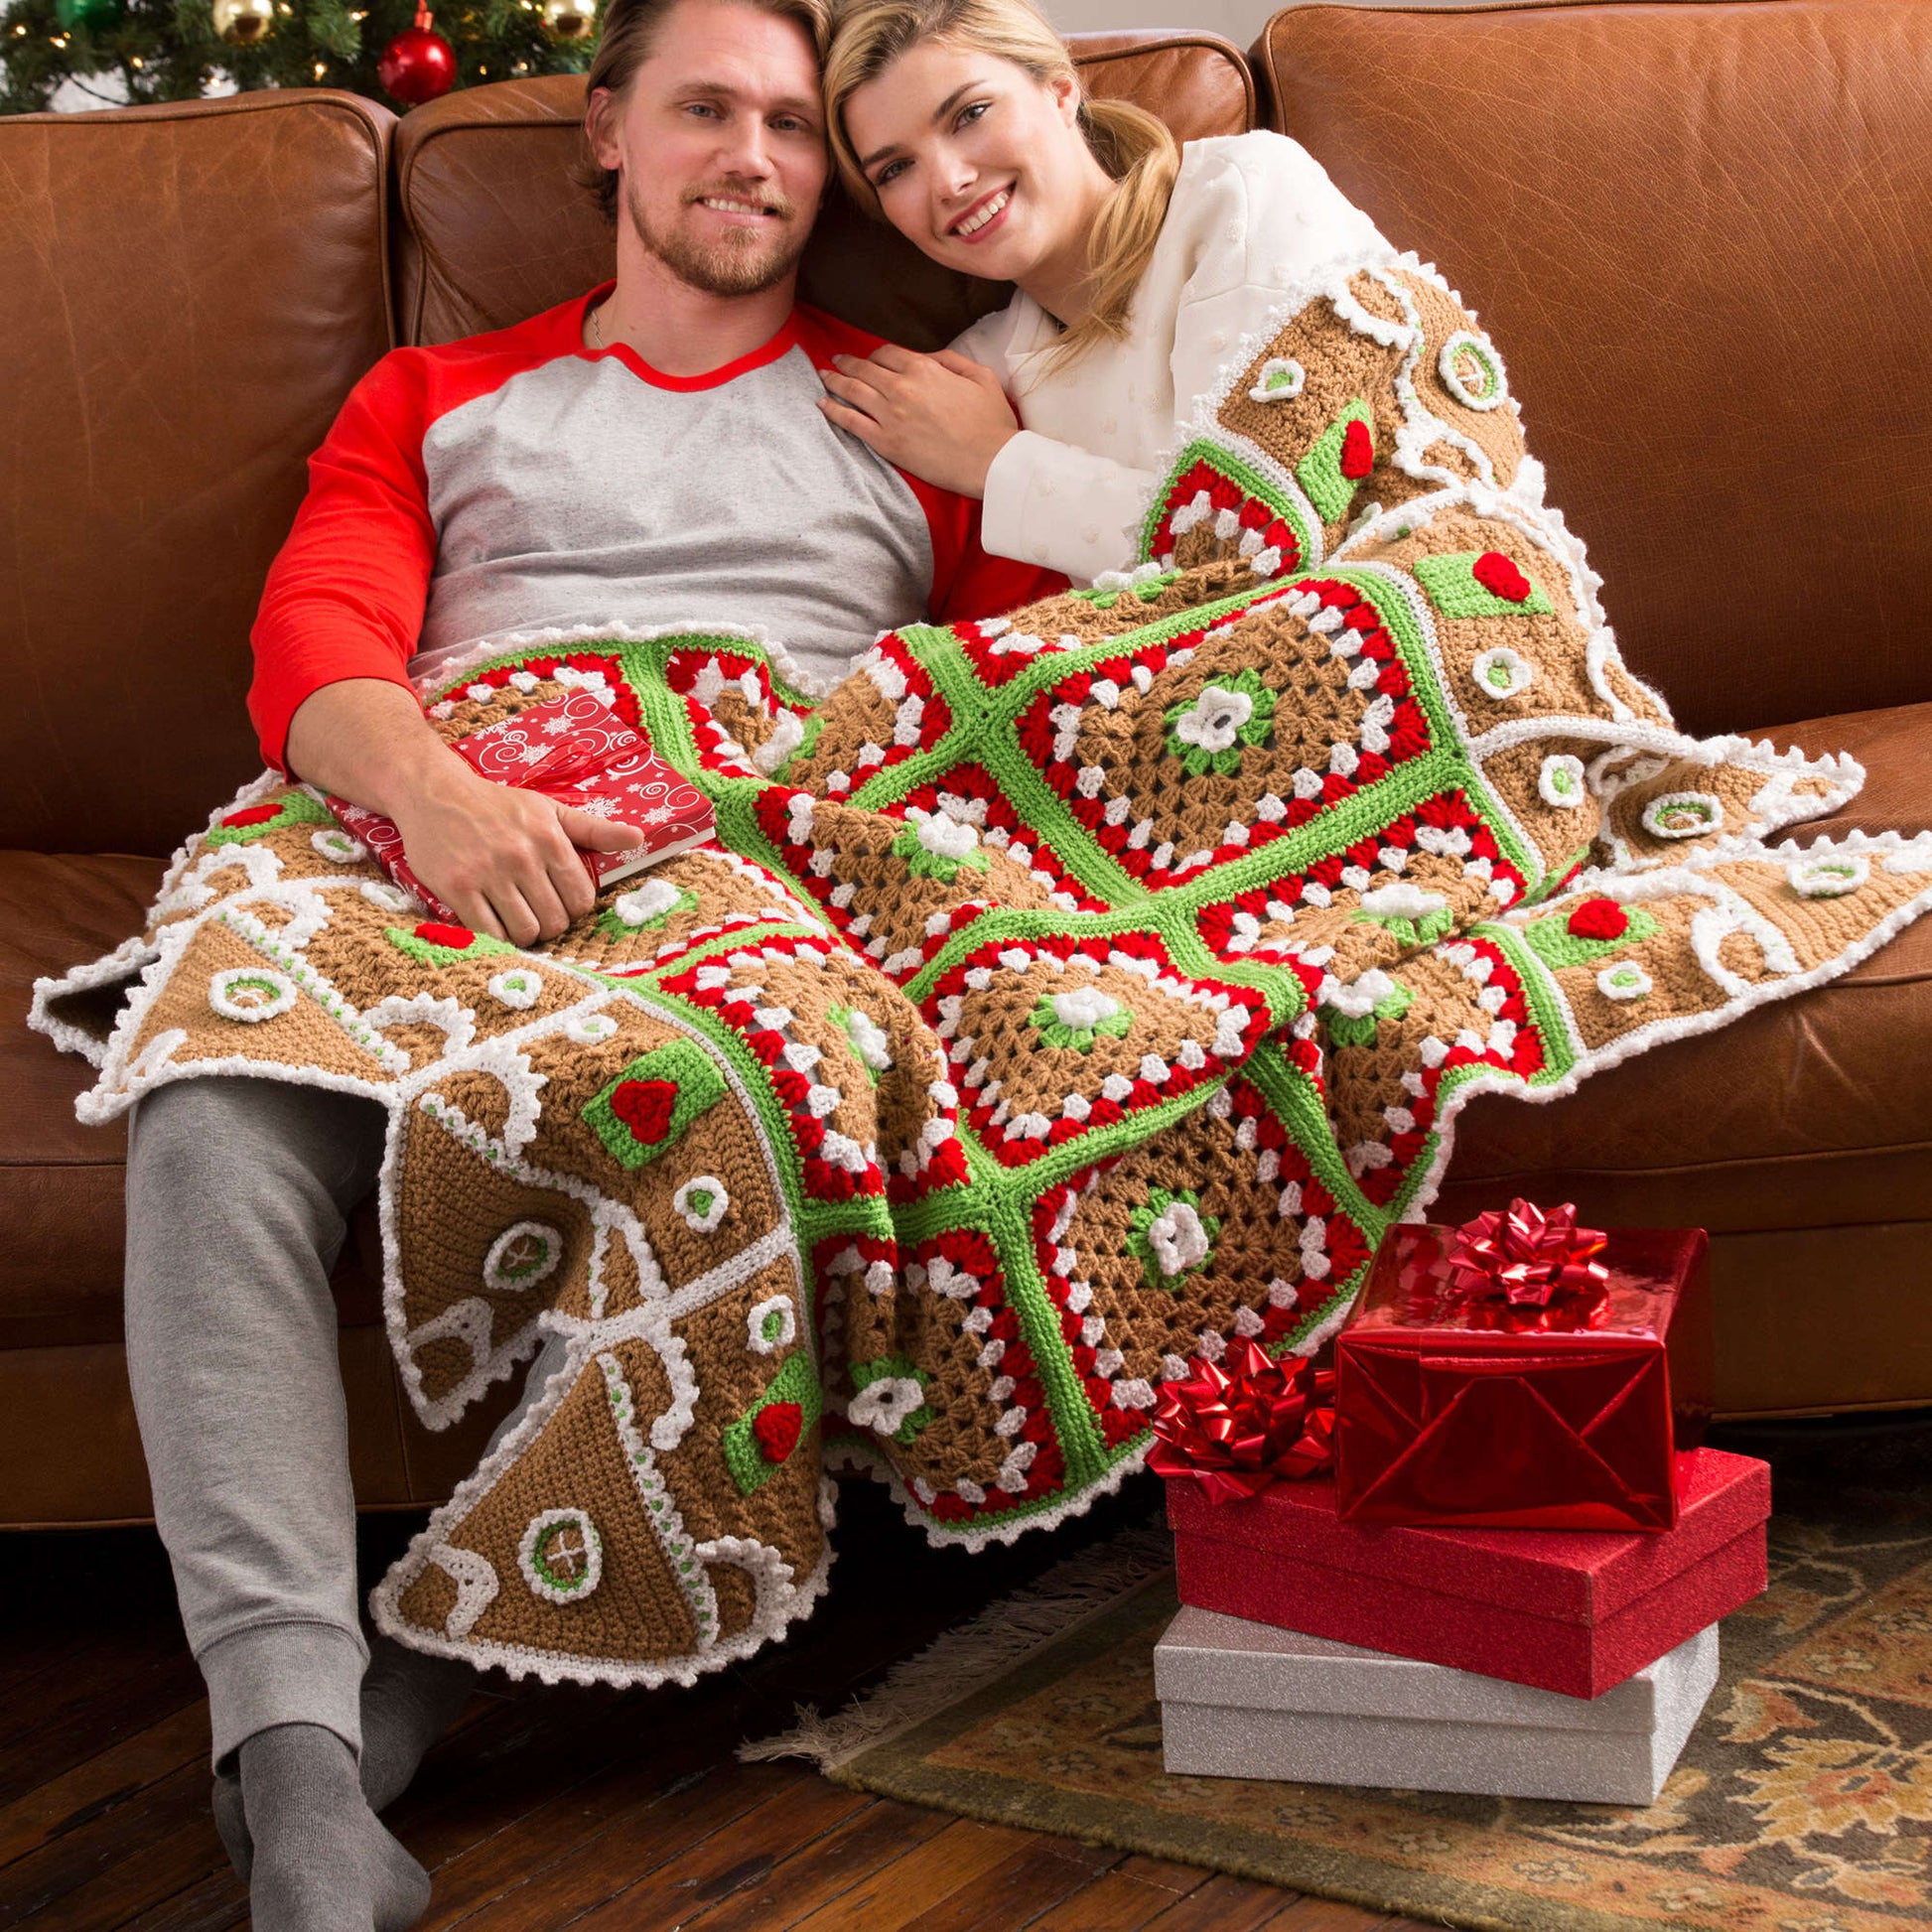 Free Red Heart Gingerbread House Throw Crochet Pattern